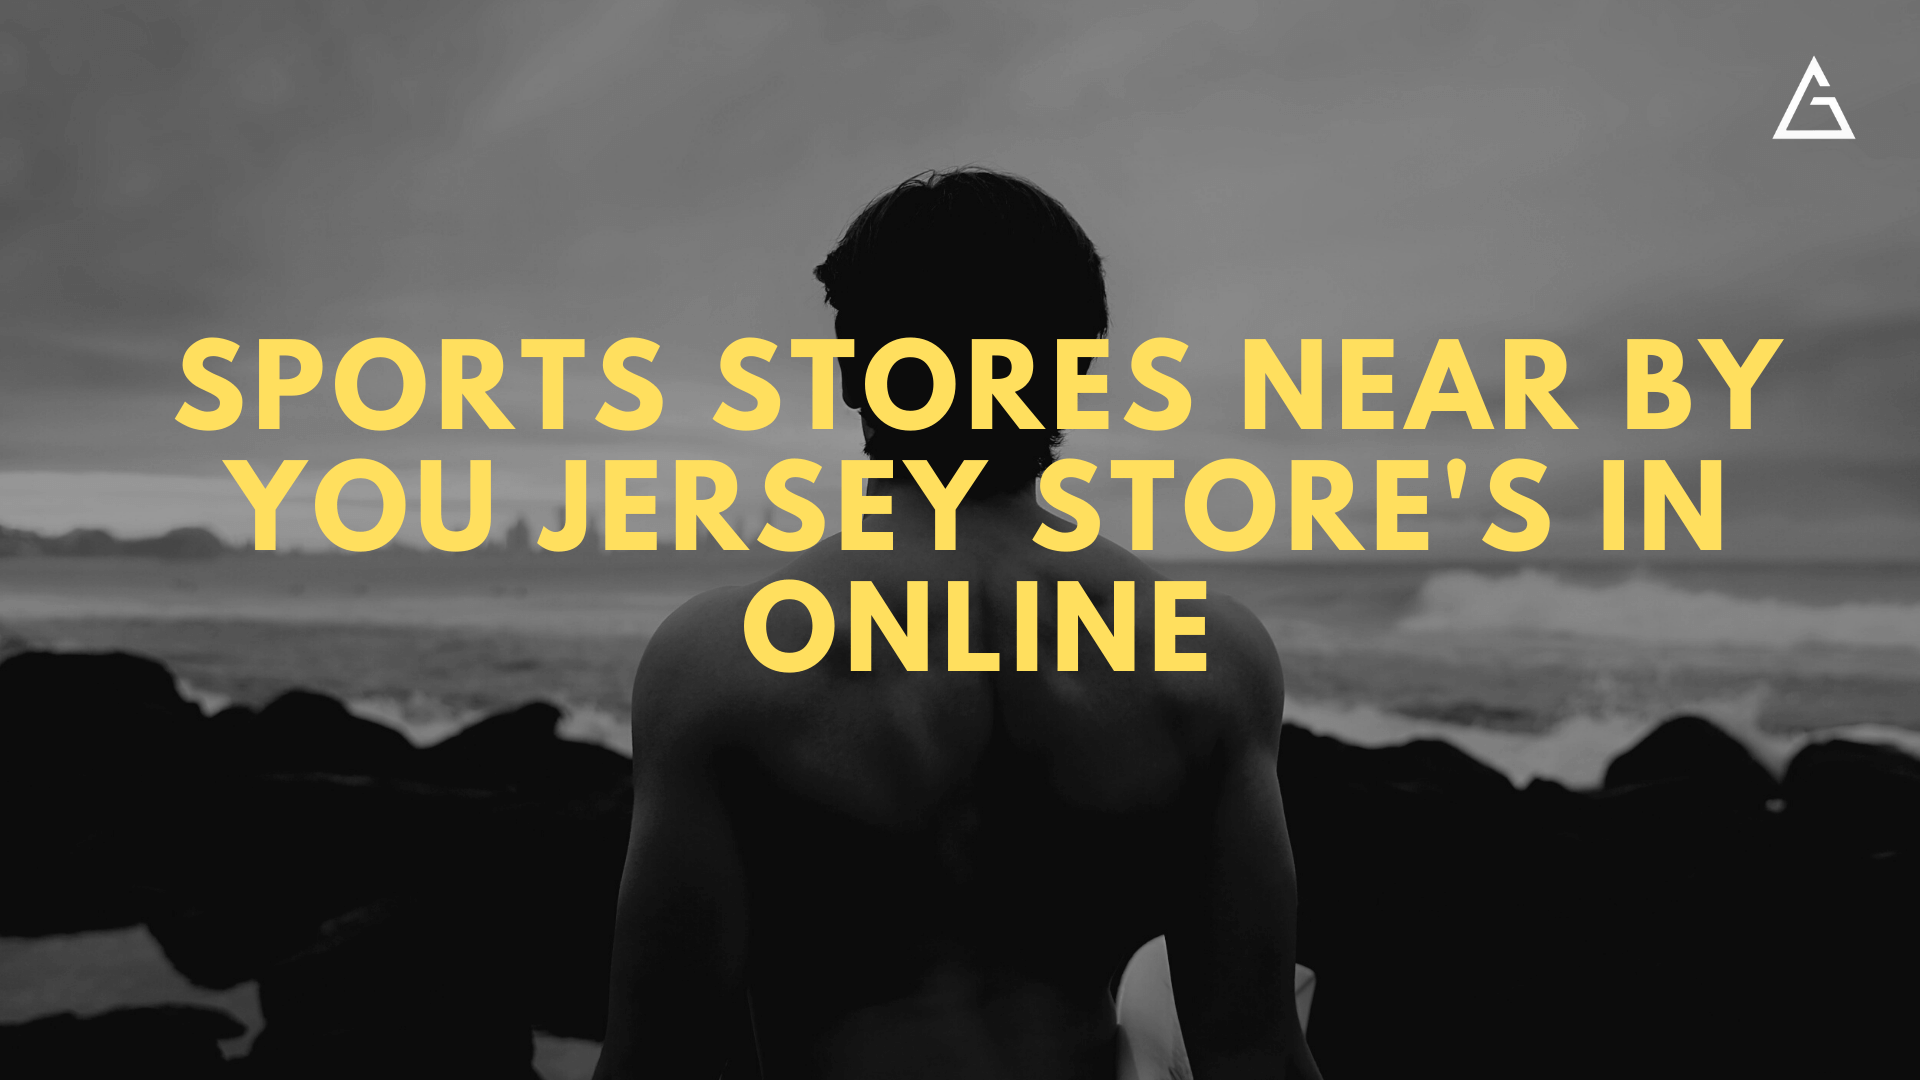 #3. how choose best sports stores near me for jersey in online